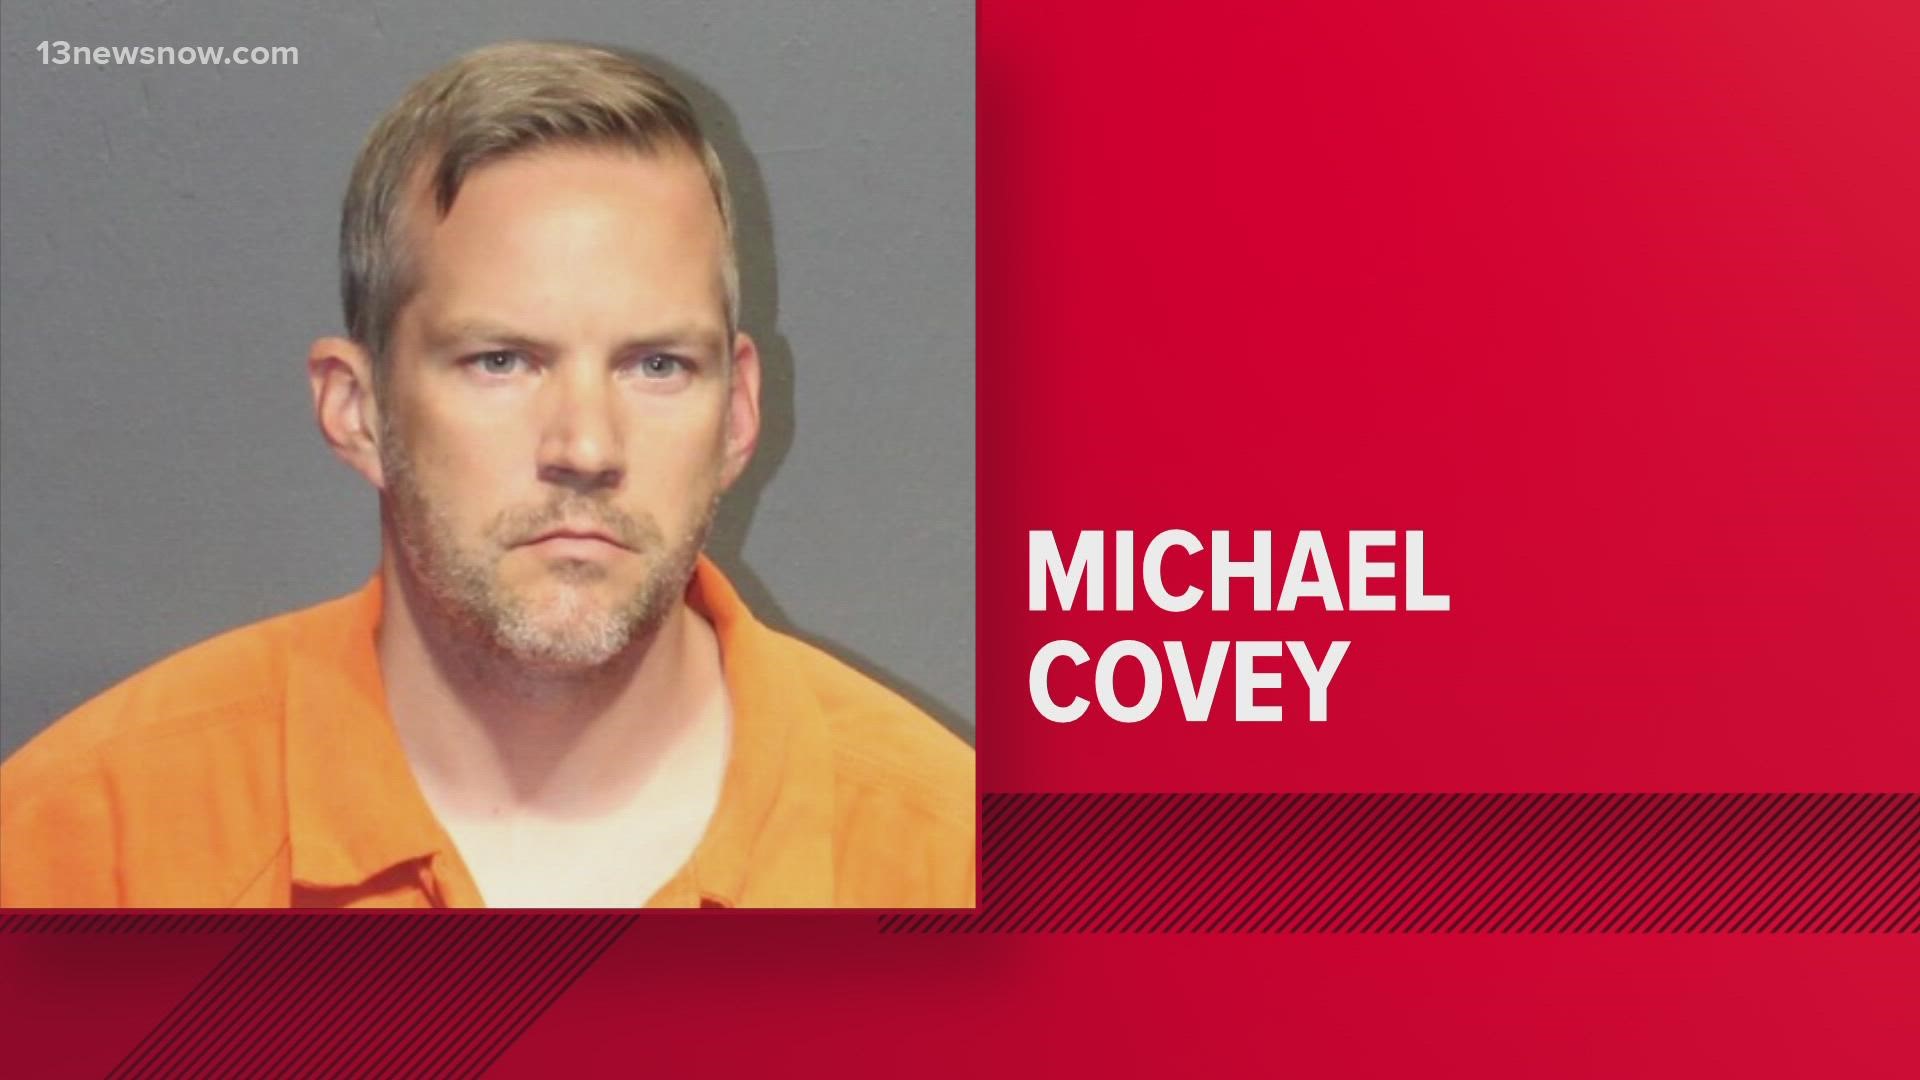 Covey faces between 15 and 80 years in prison when he's sentenced in February.